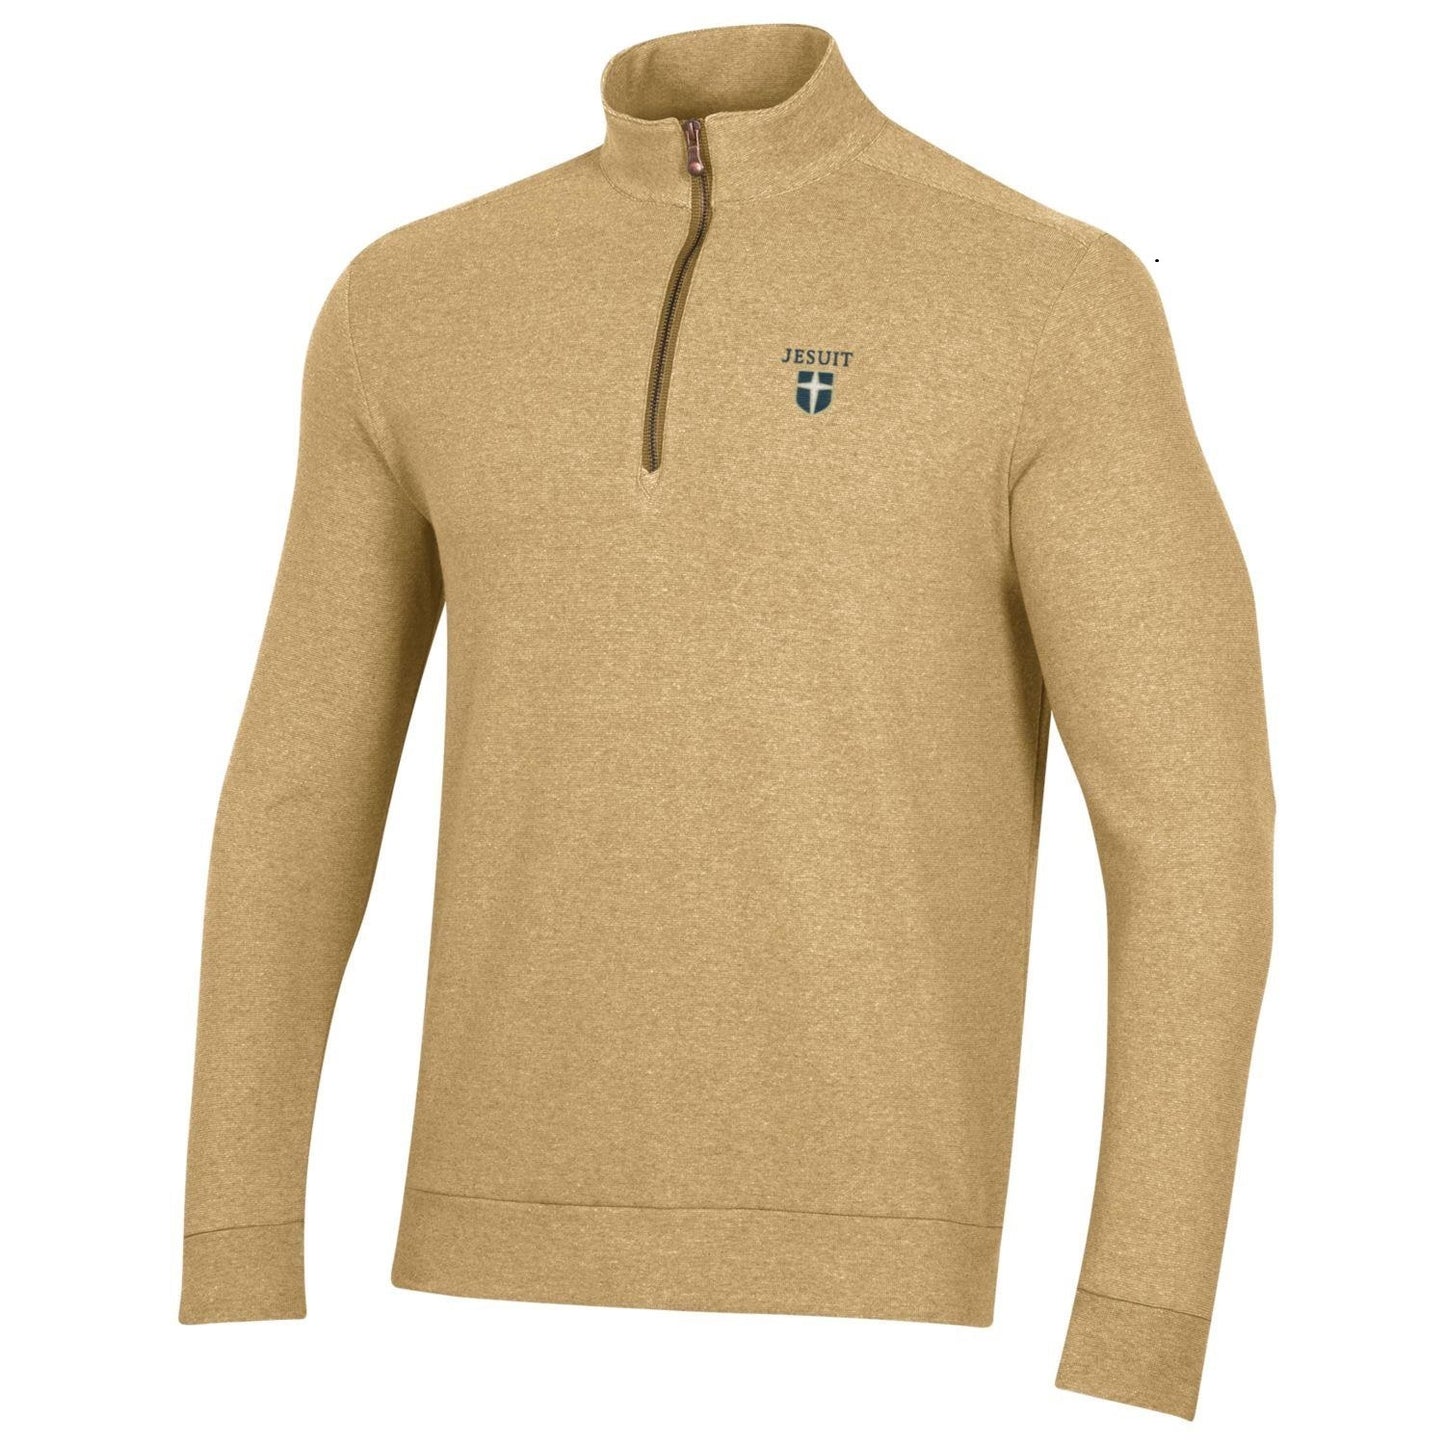 The Midway 1/4 zip (2 colors)